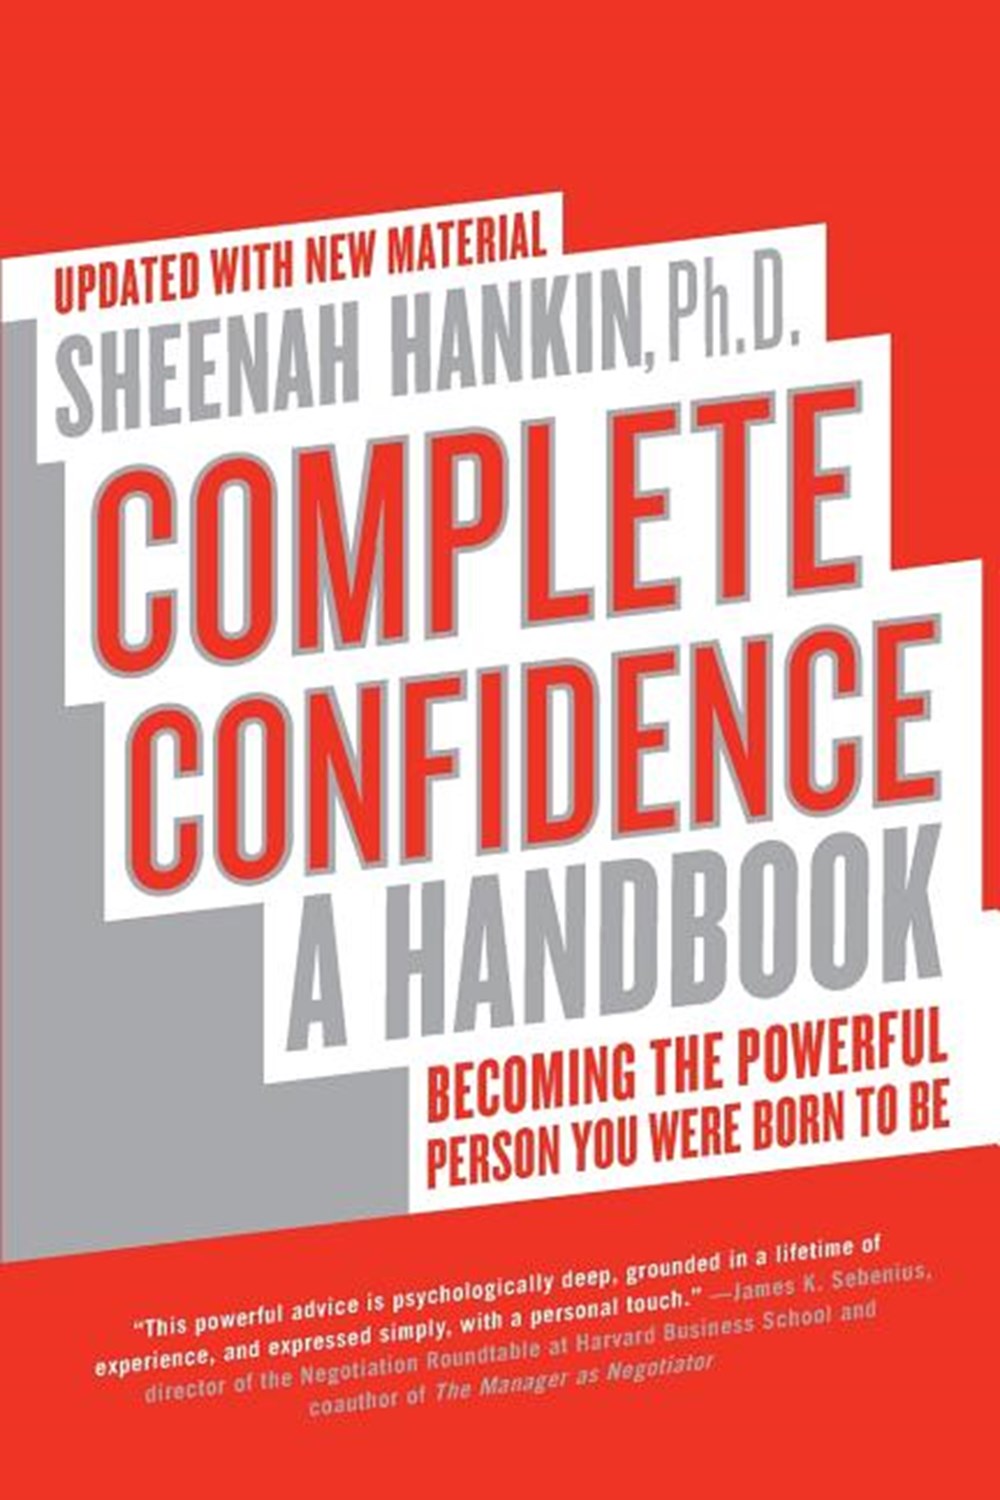 Complete Confidence Updated Edition